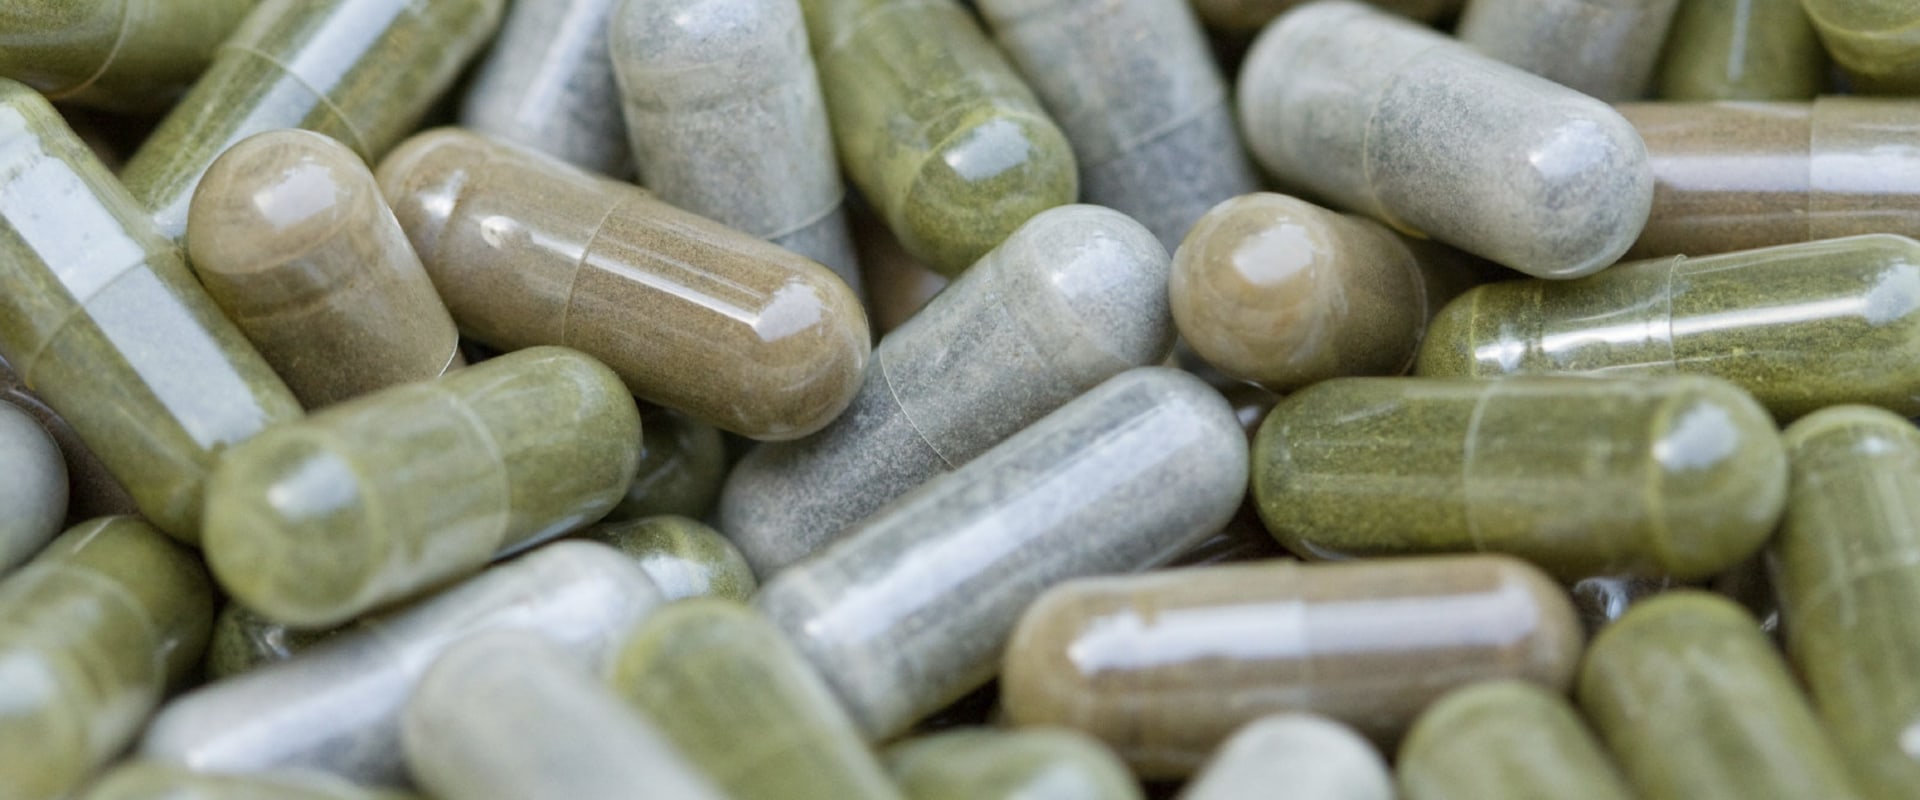 Are Vitamin Supplements Really Dangerous?